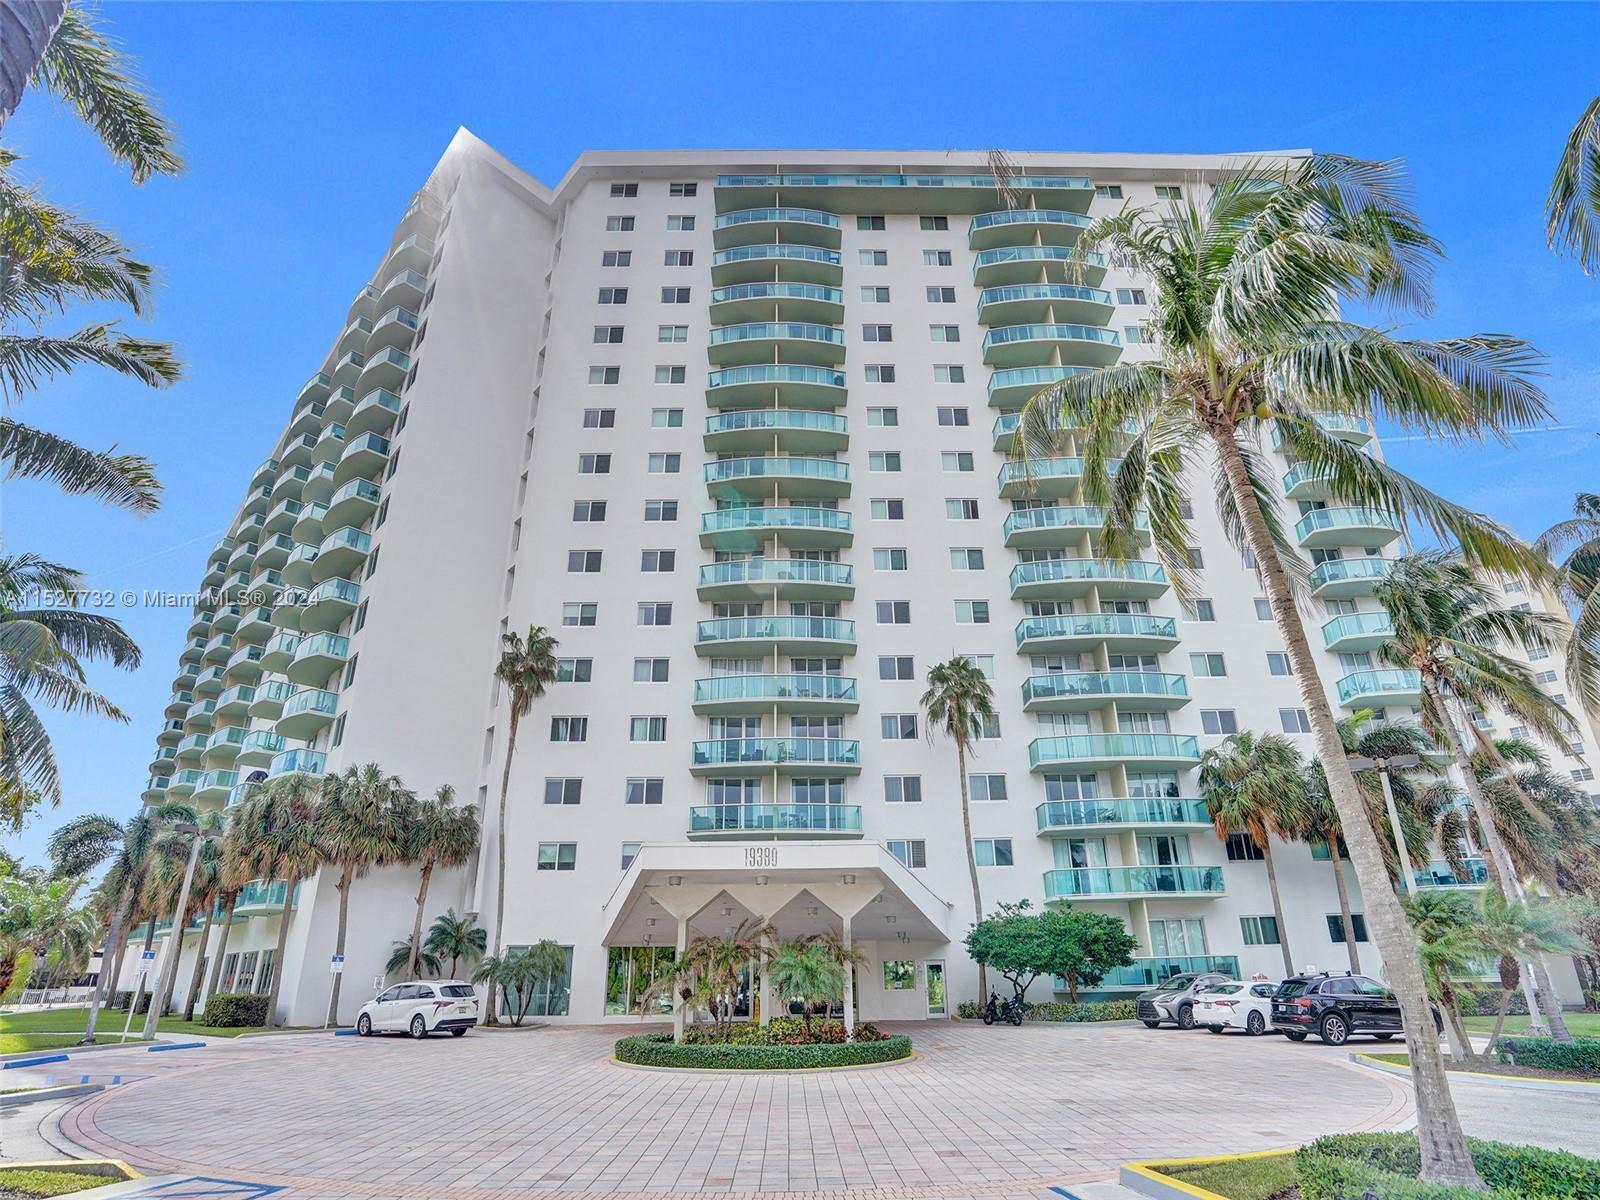 Clean, Spacious, and Bright 2nd Floor 1Bd/1Bth Condo with an updated bathroom, hurricane impact wind